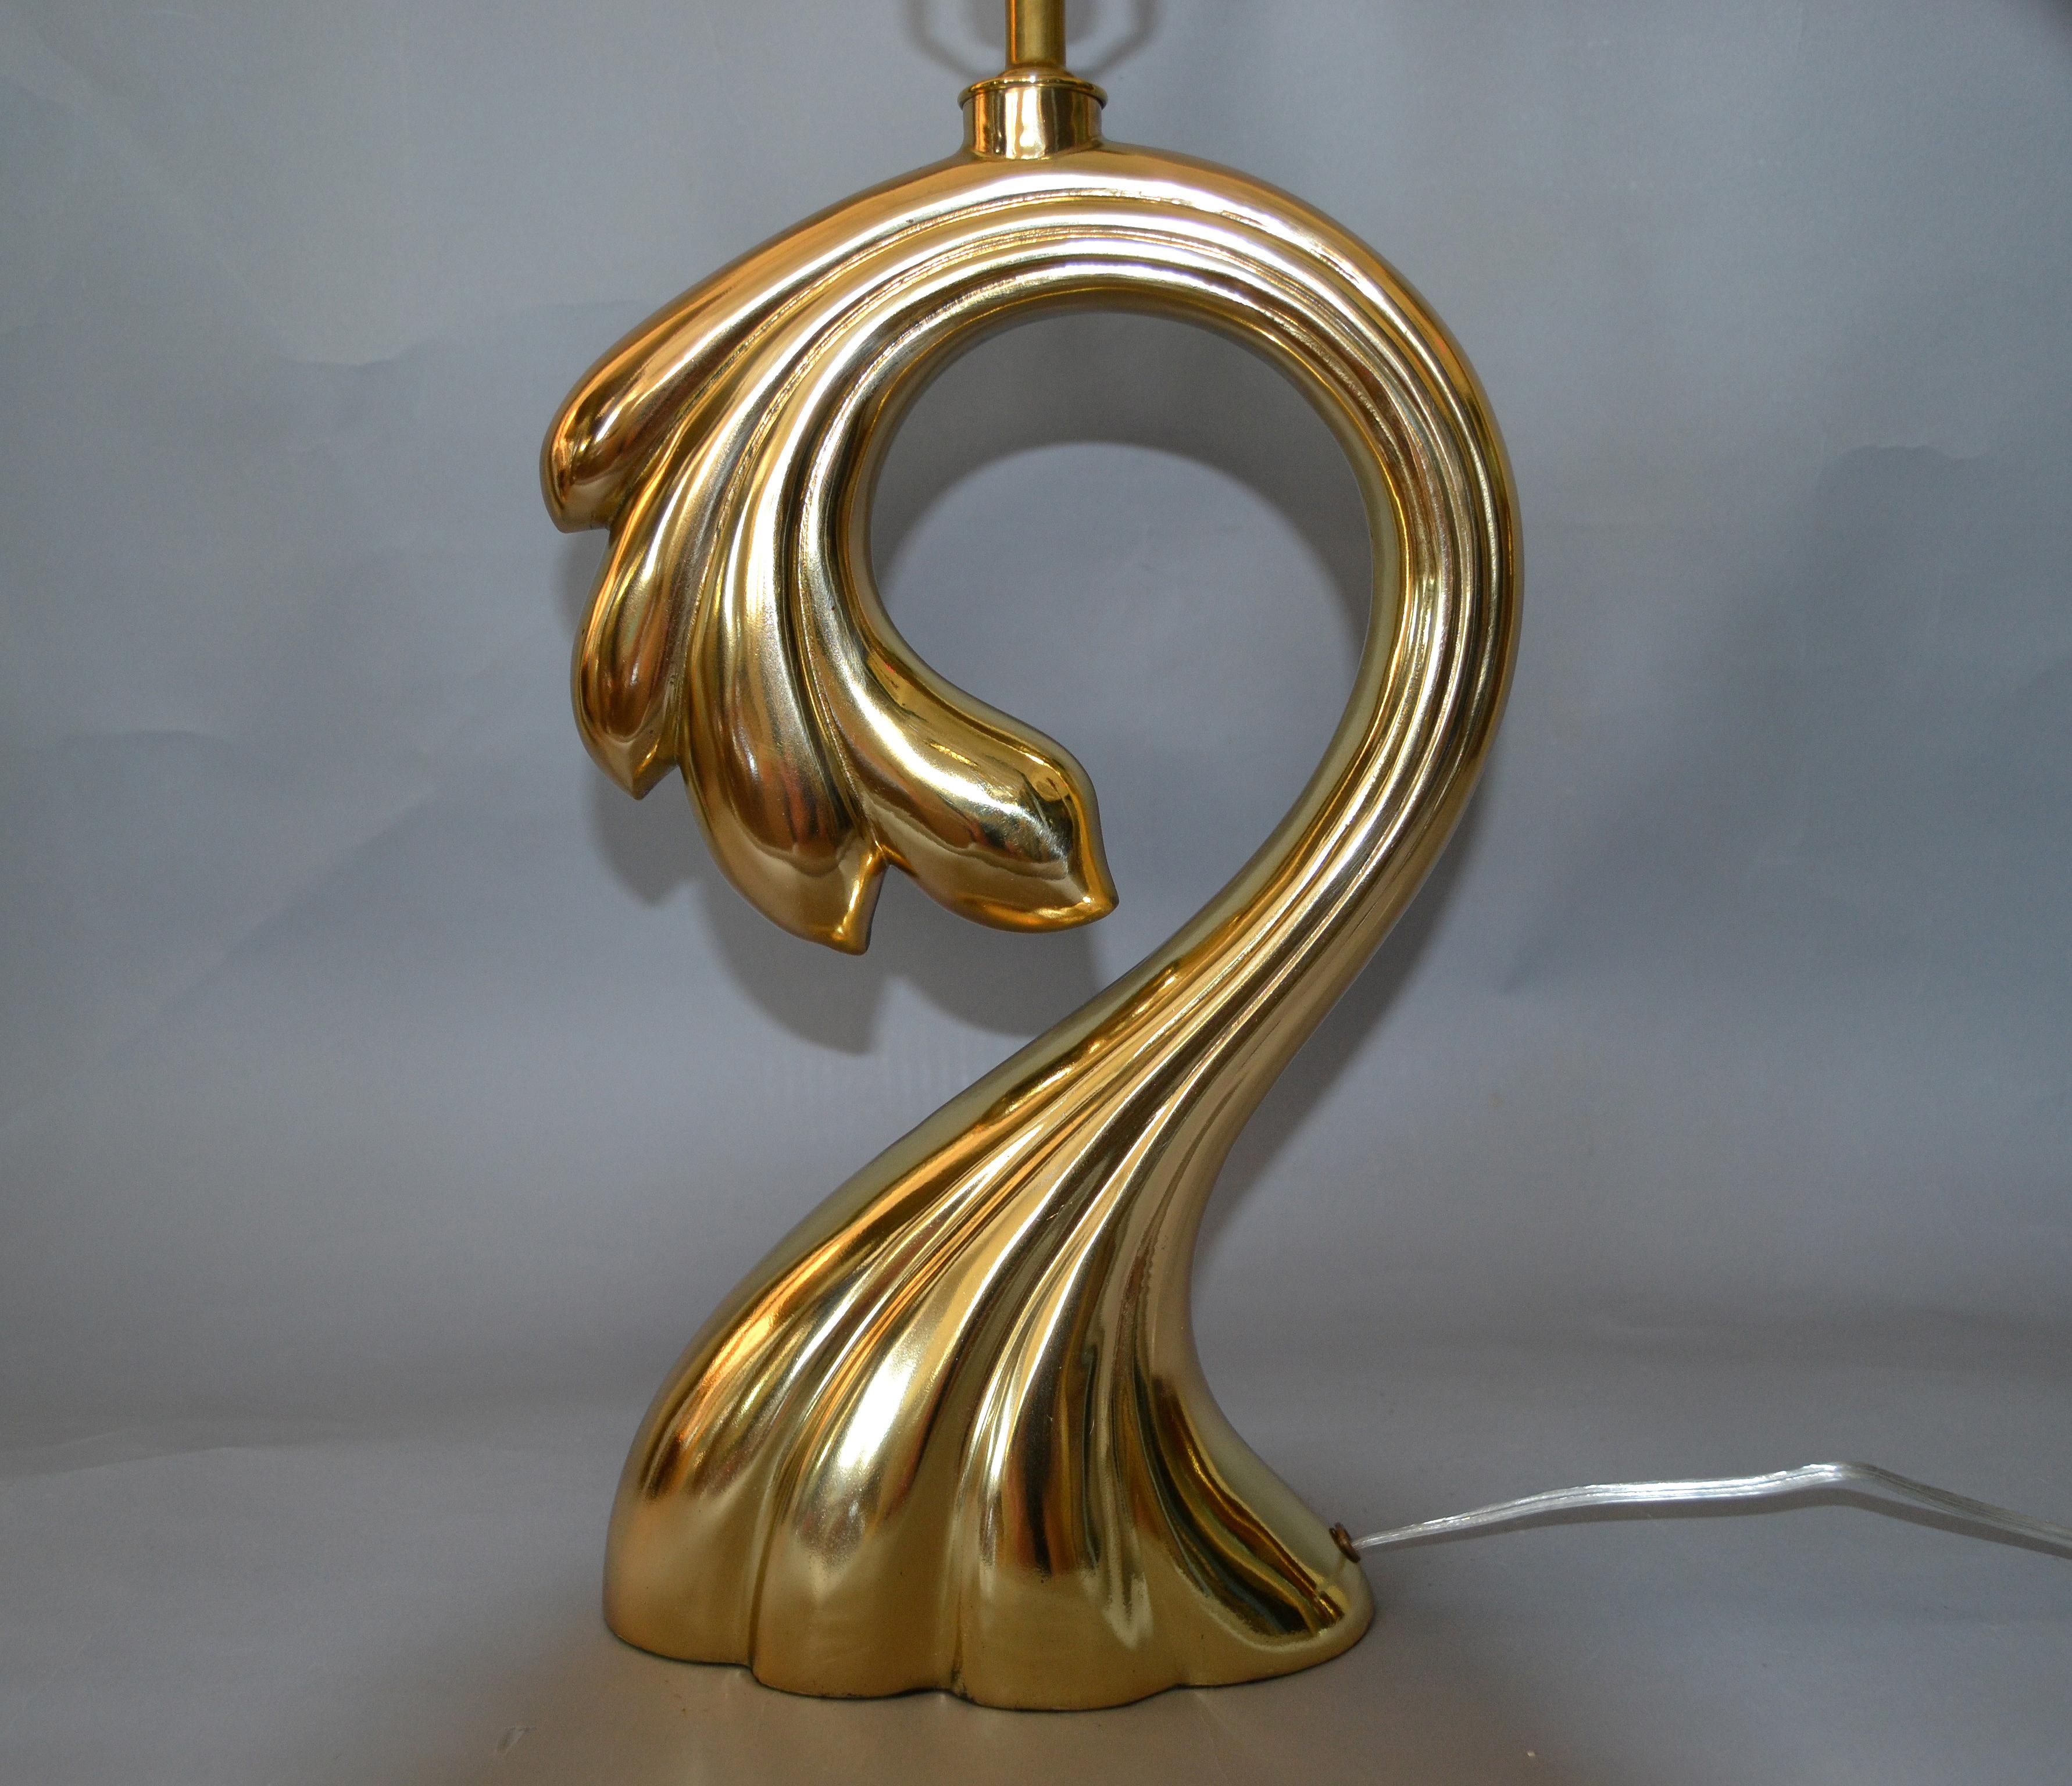 American Pierre Cardin Manner Sculptural Brass Table Lamp Mid-Century Modern For Sale